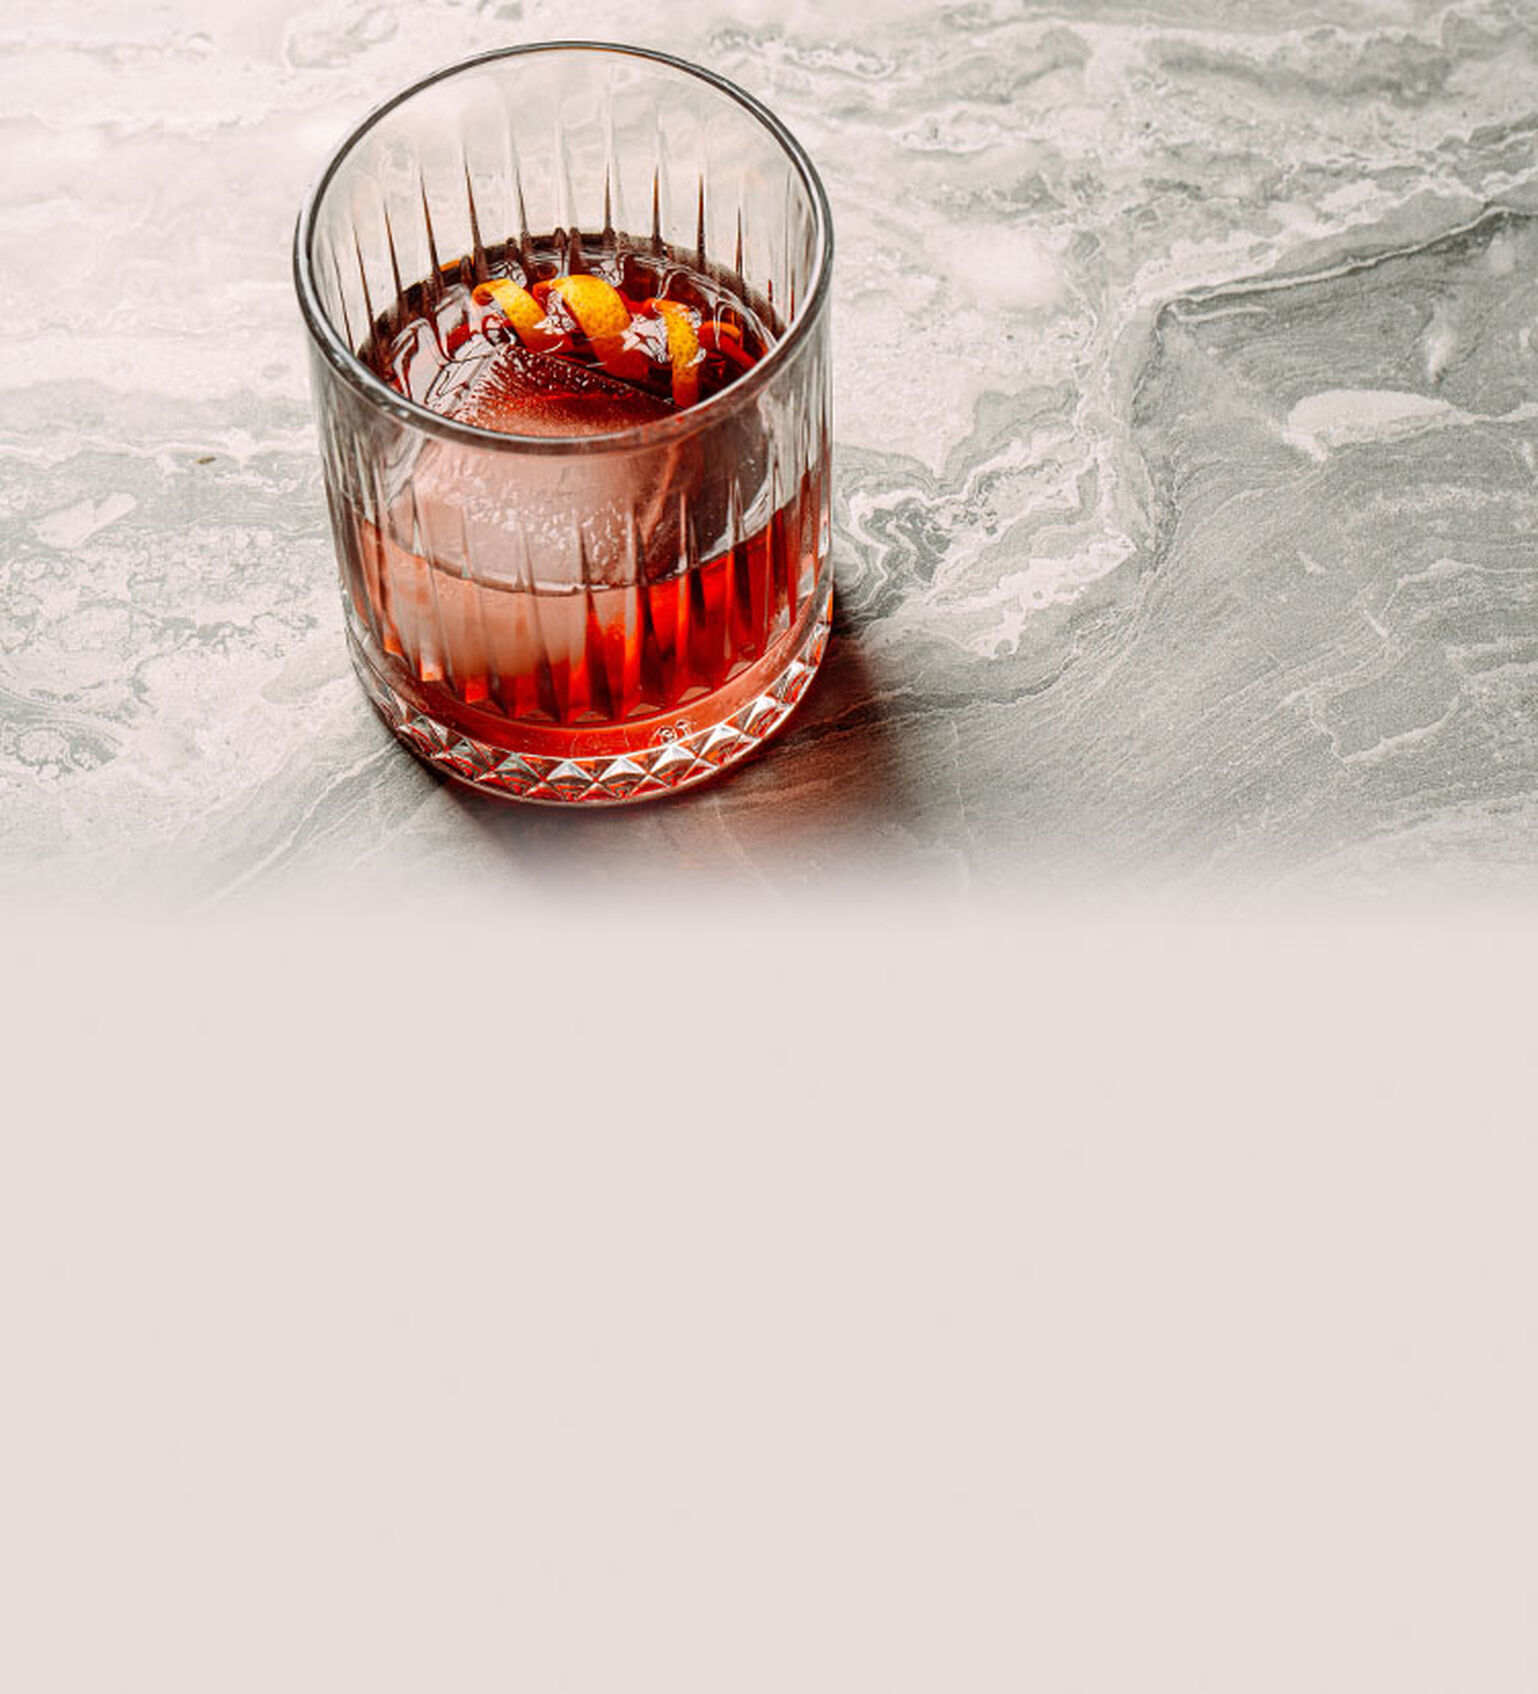 A Negroni is displayed on a marble countertop